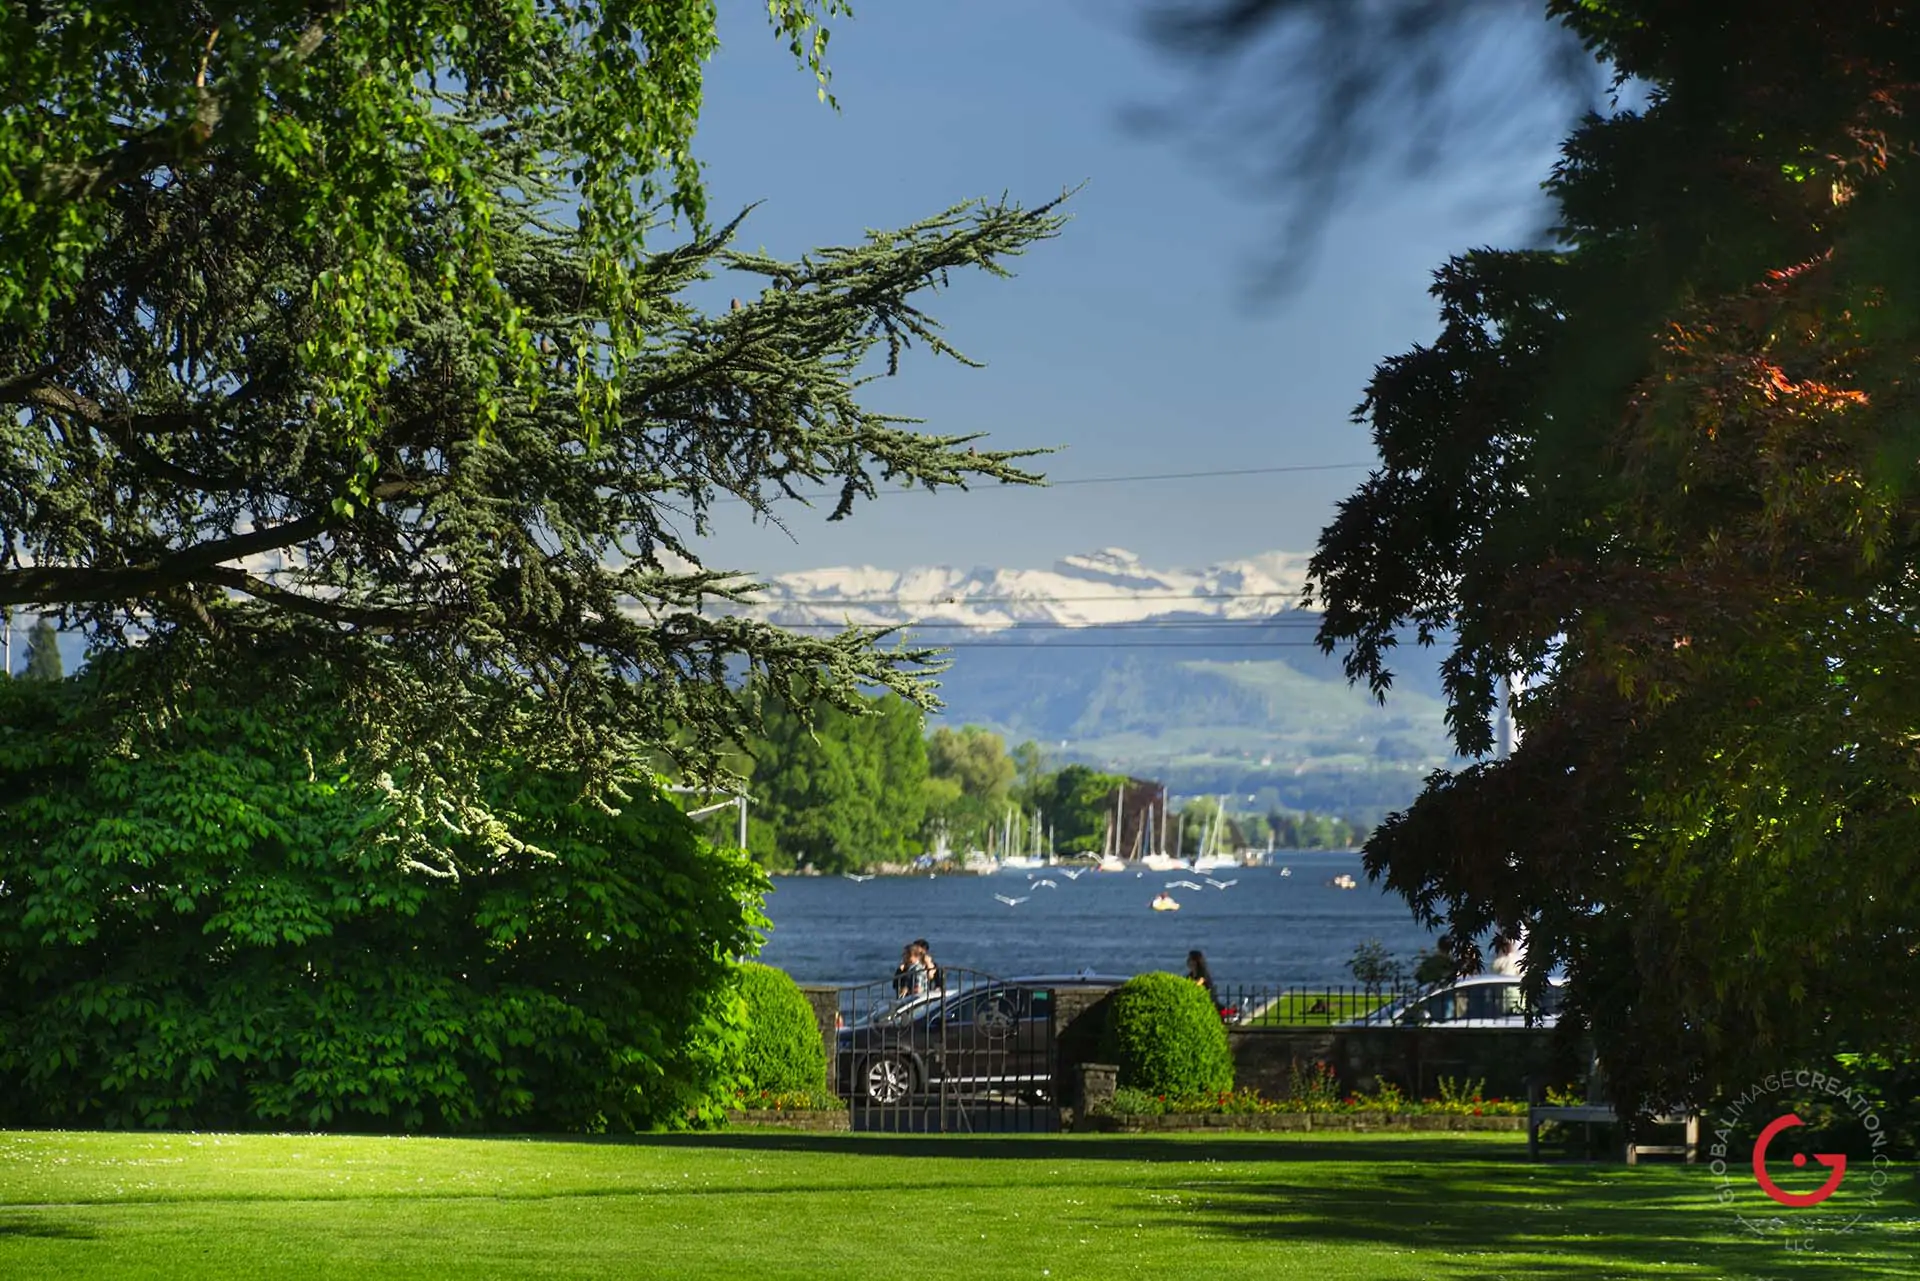 The Park of the Baur au Lac with Lake Zurich in the Background - Travel Photographer and Switzerland Photography